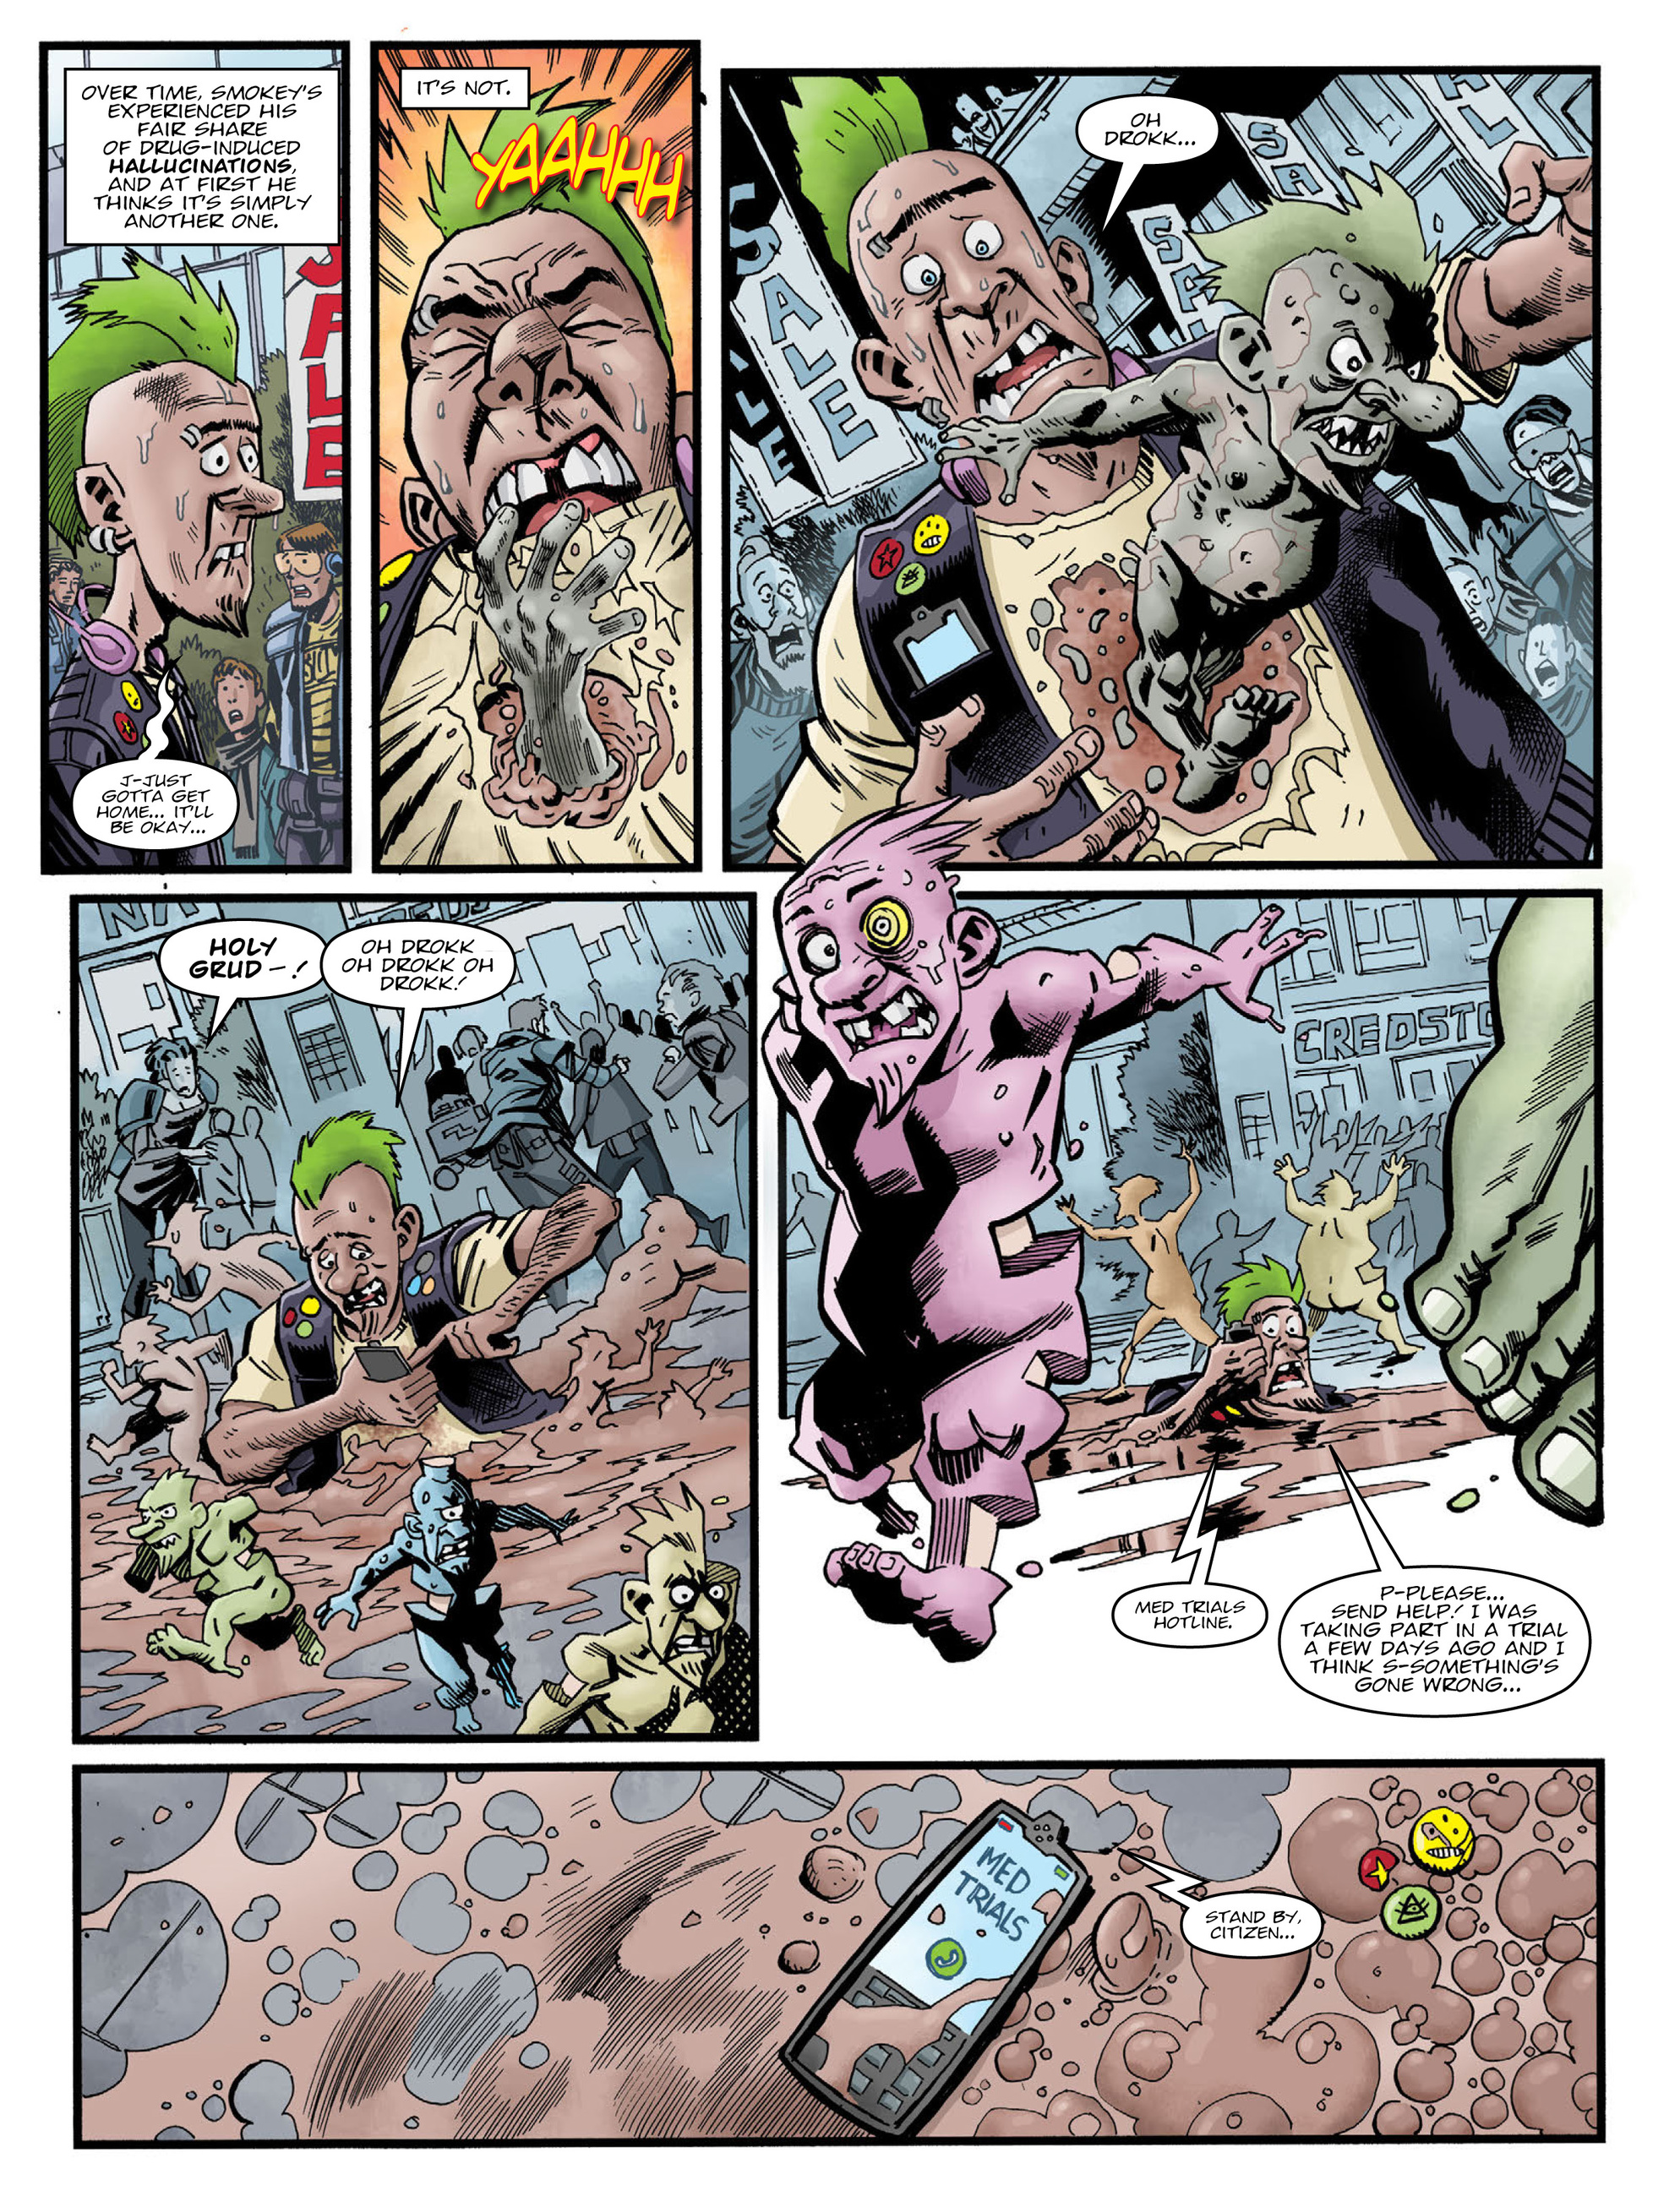 2000 AD: Chapter 2110 - Page 4